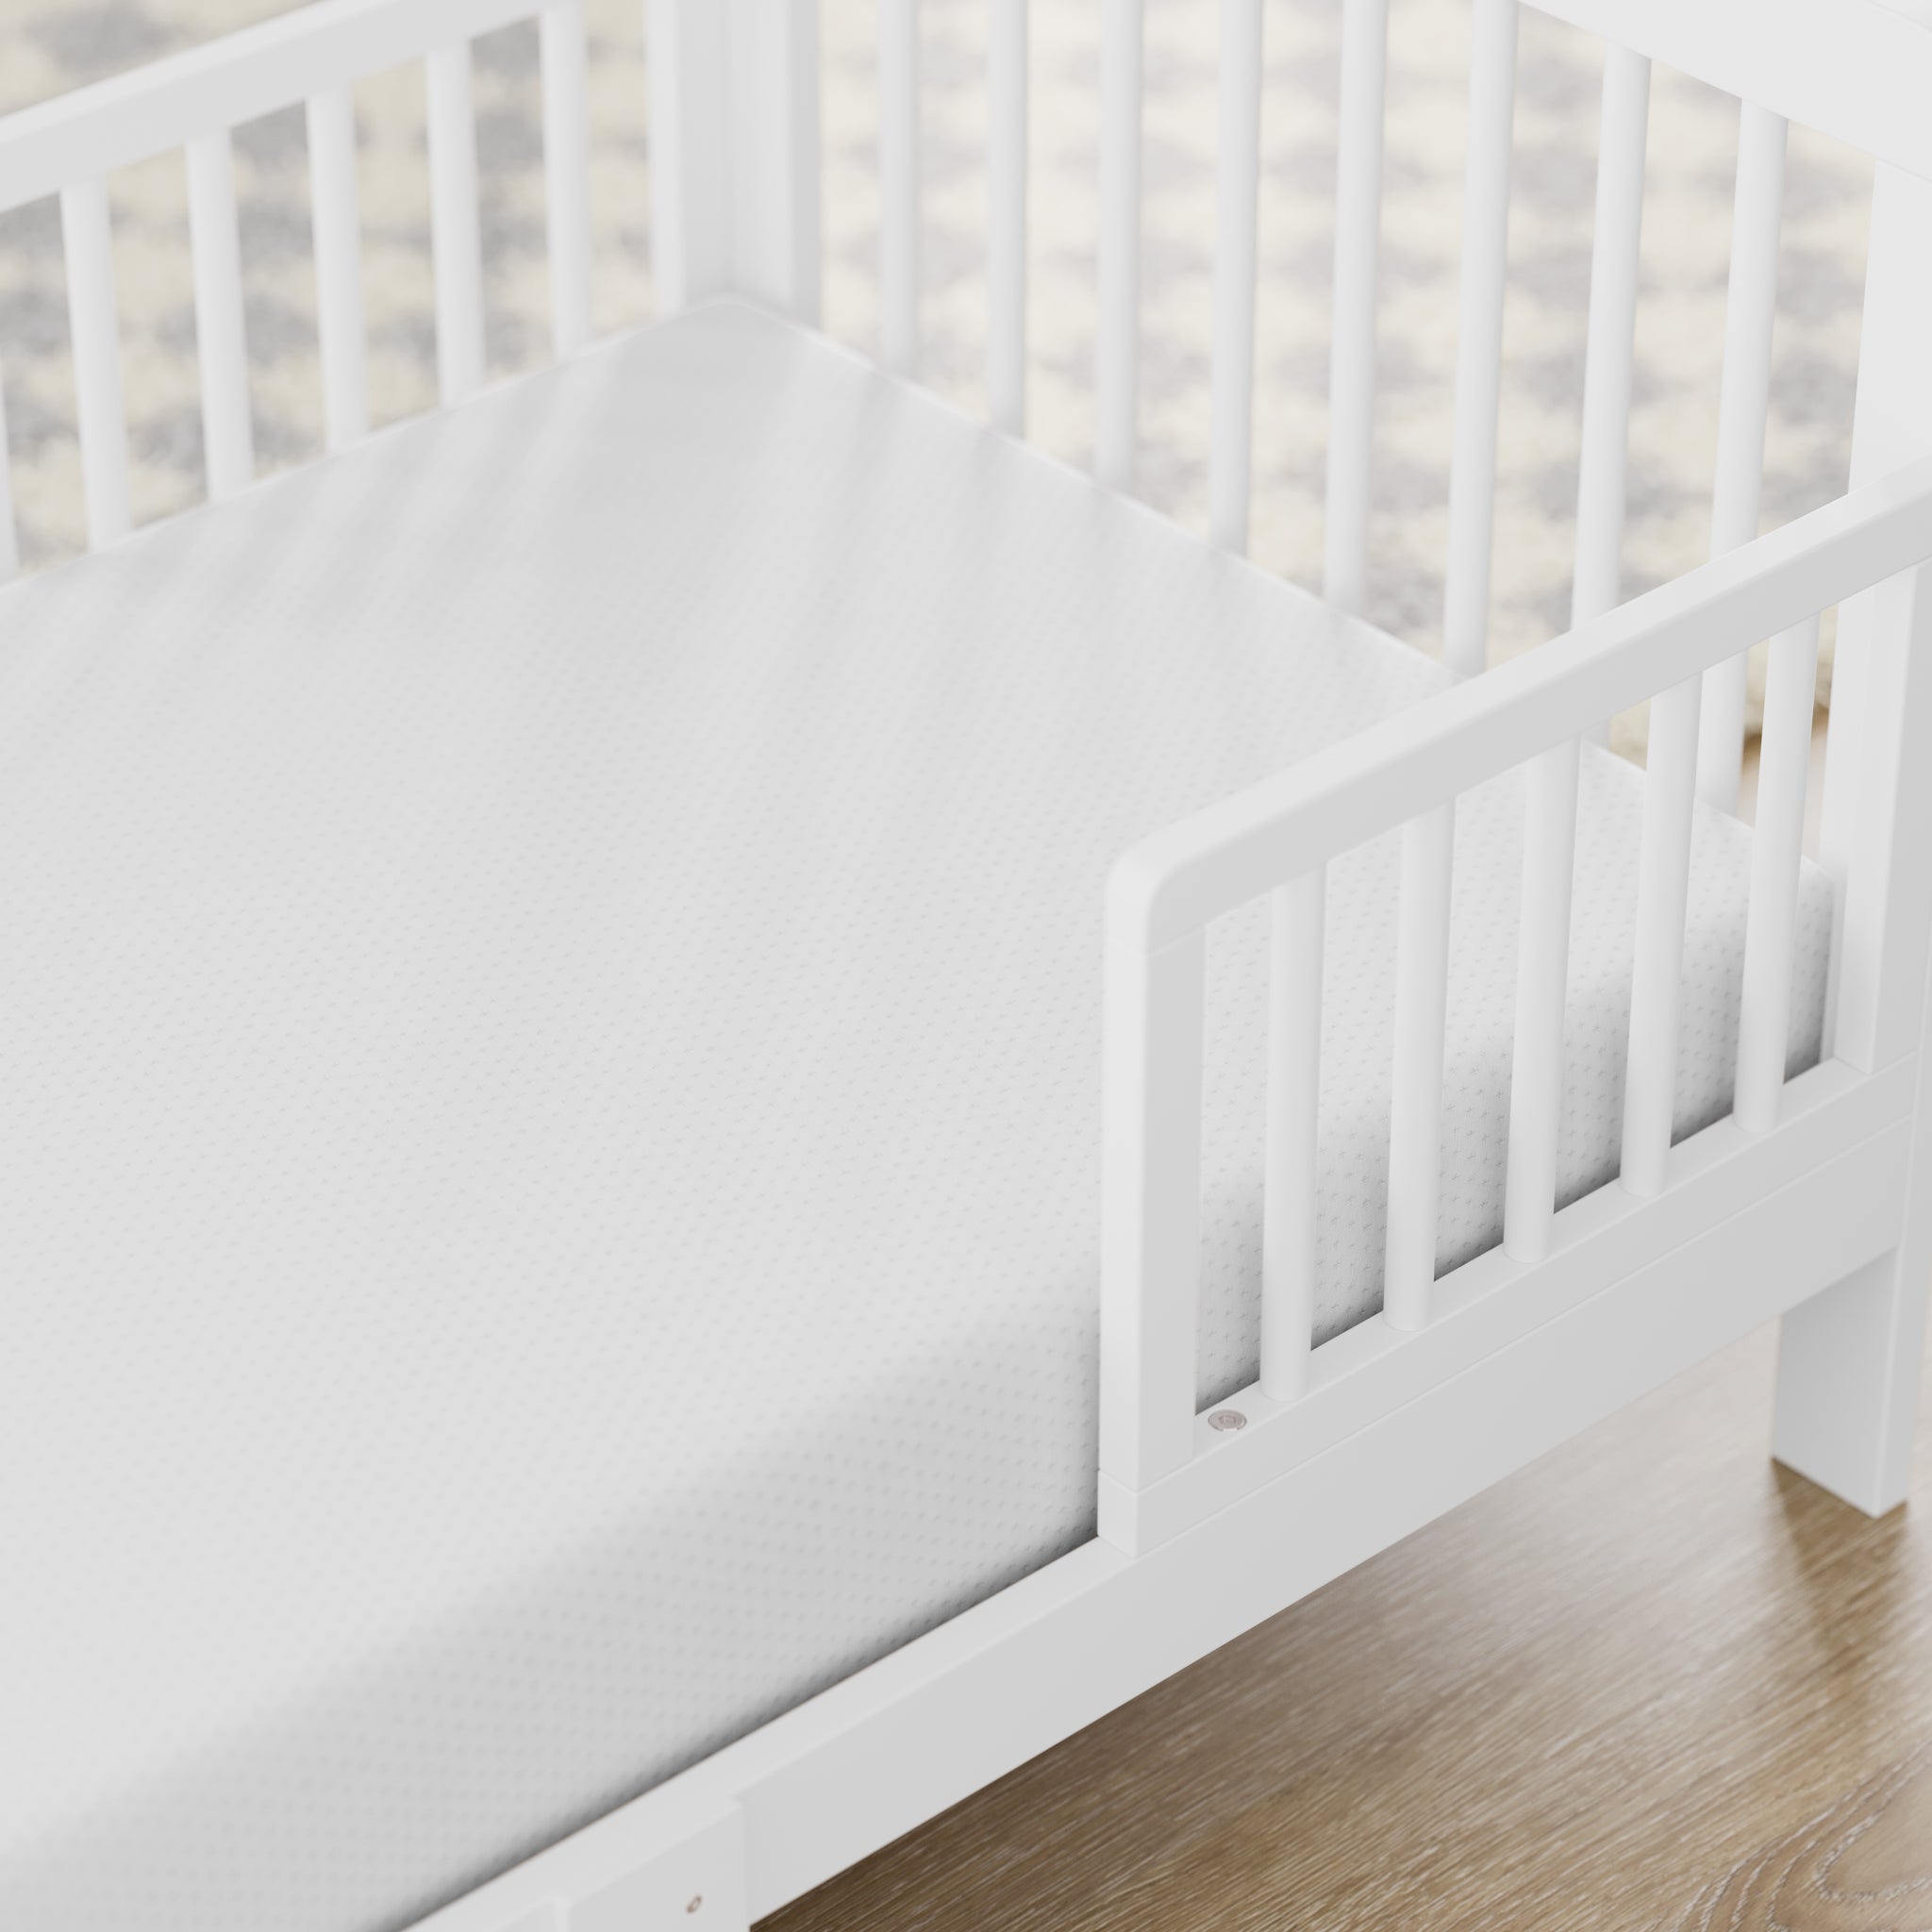 Close-up view of a mattress in a toddler bed in a room